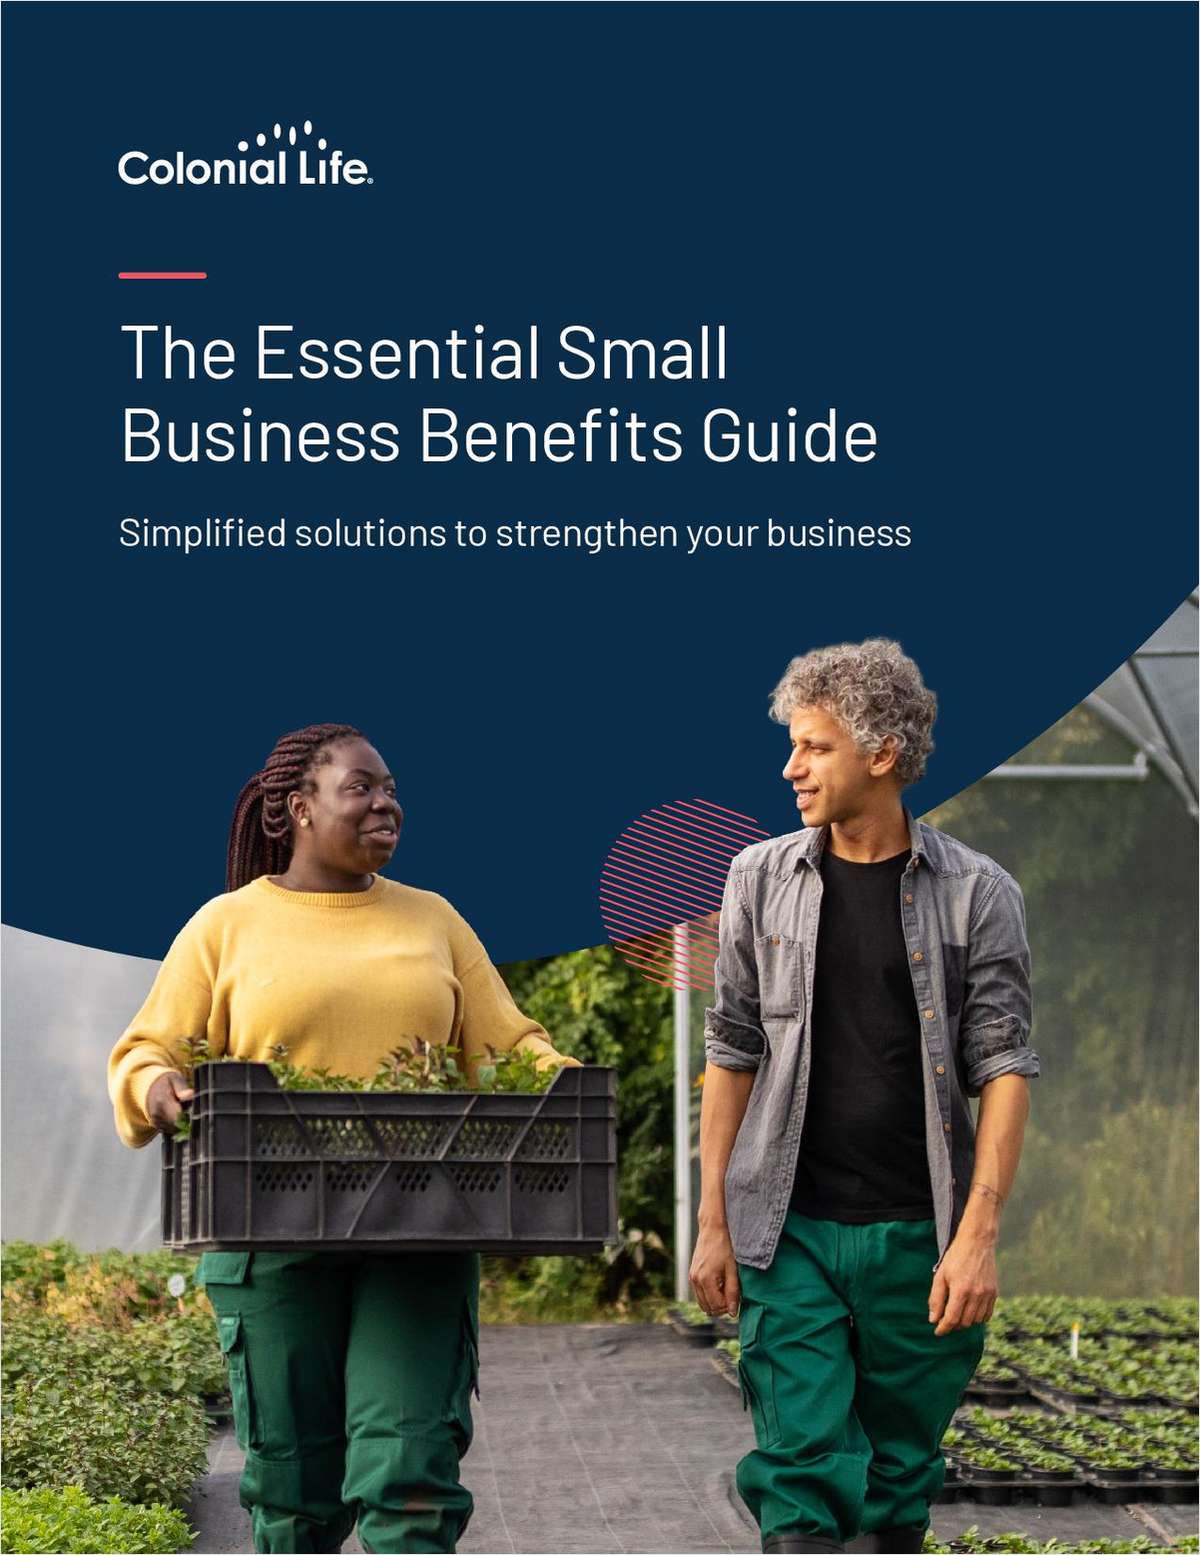 The Essential Small Business Benefits Guide